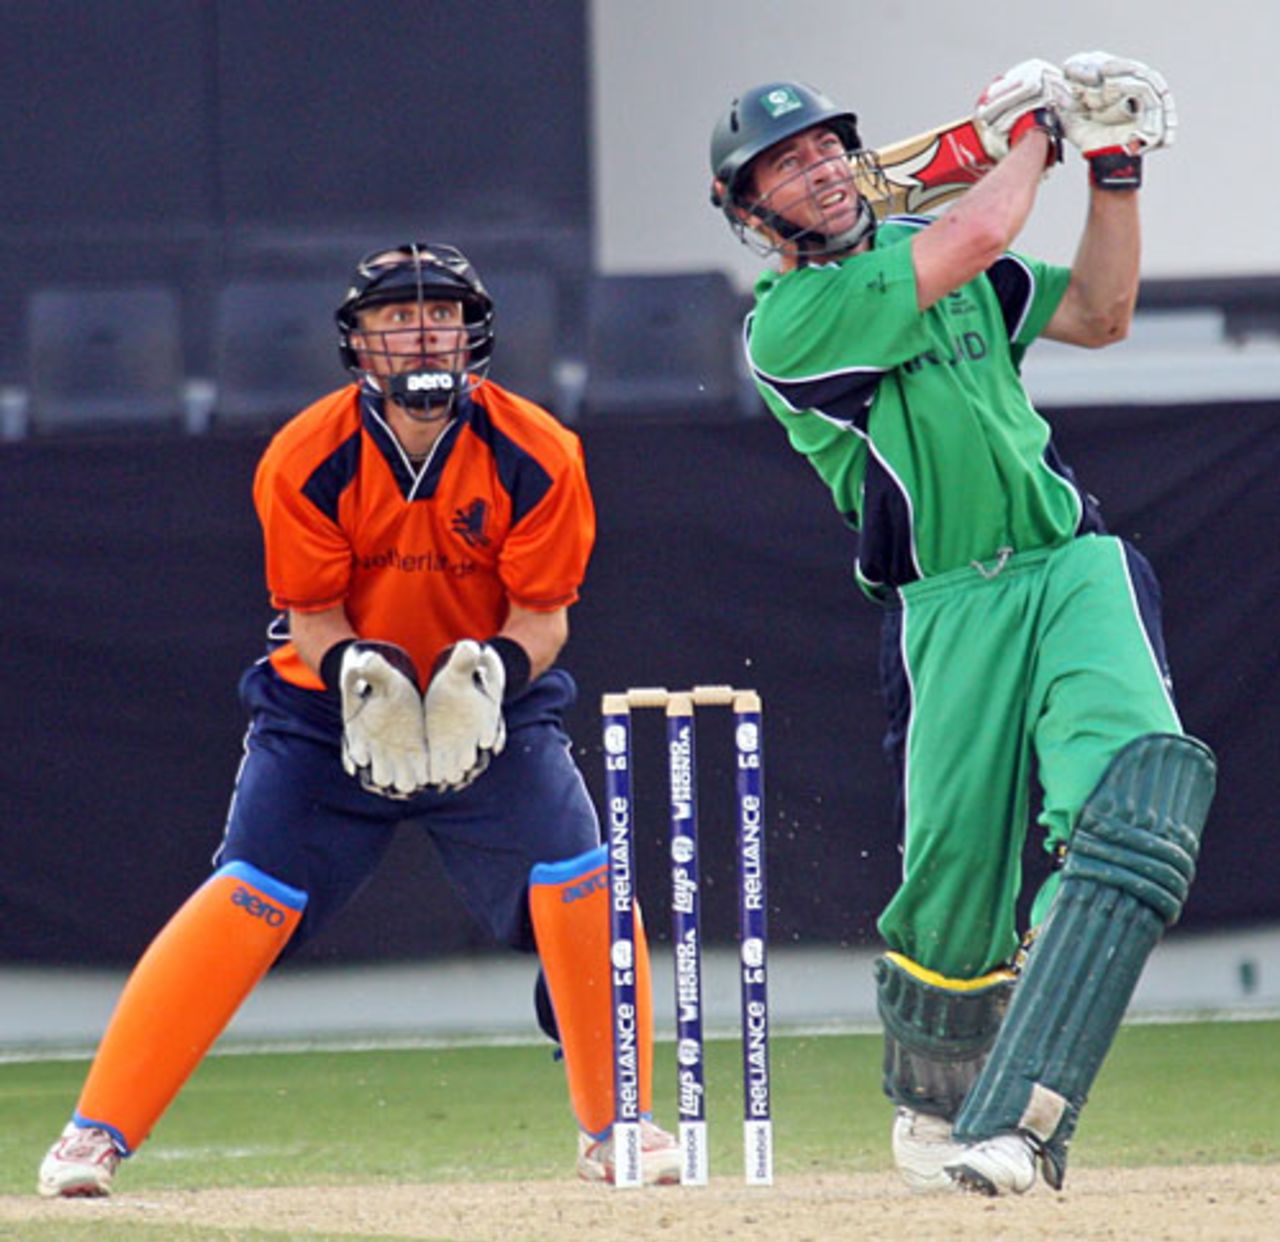 Alex Cusack was the foundation of Ireland's innings with a man-of-the-match winning 65, United Arab Emirates v Afghanistan, ICC World Twenty20 Qualifier, Super Four, Dubai, February 13, 2010